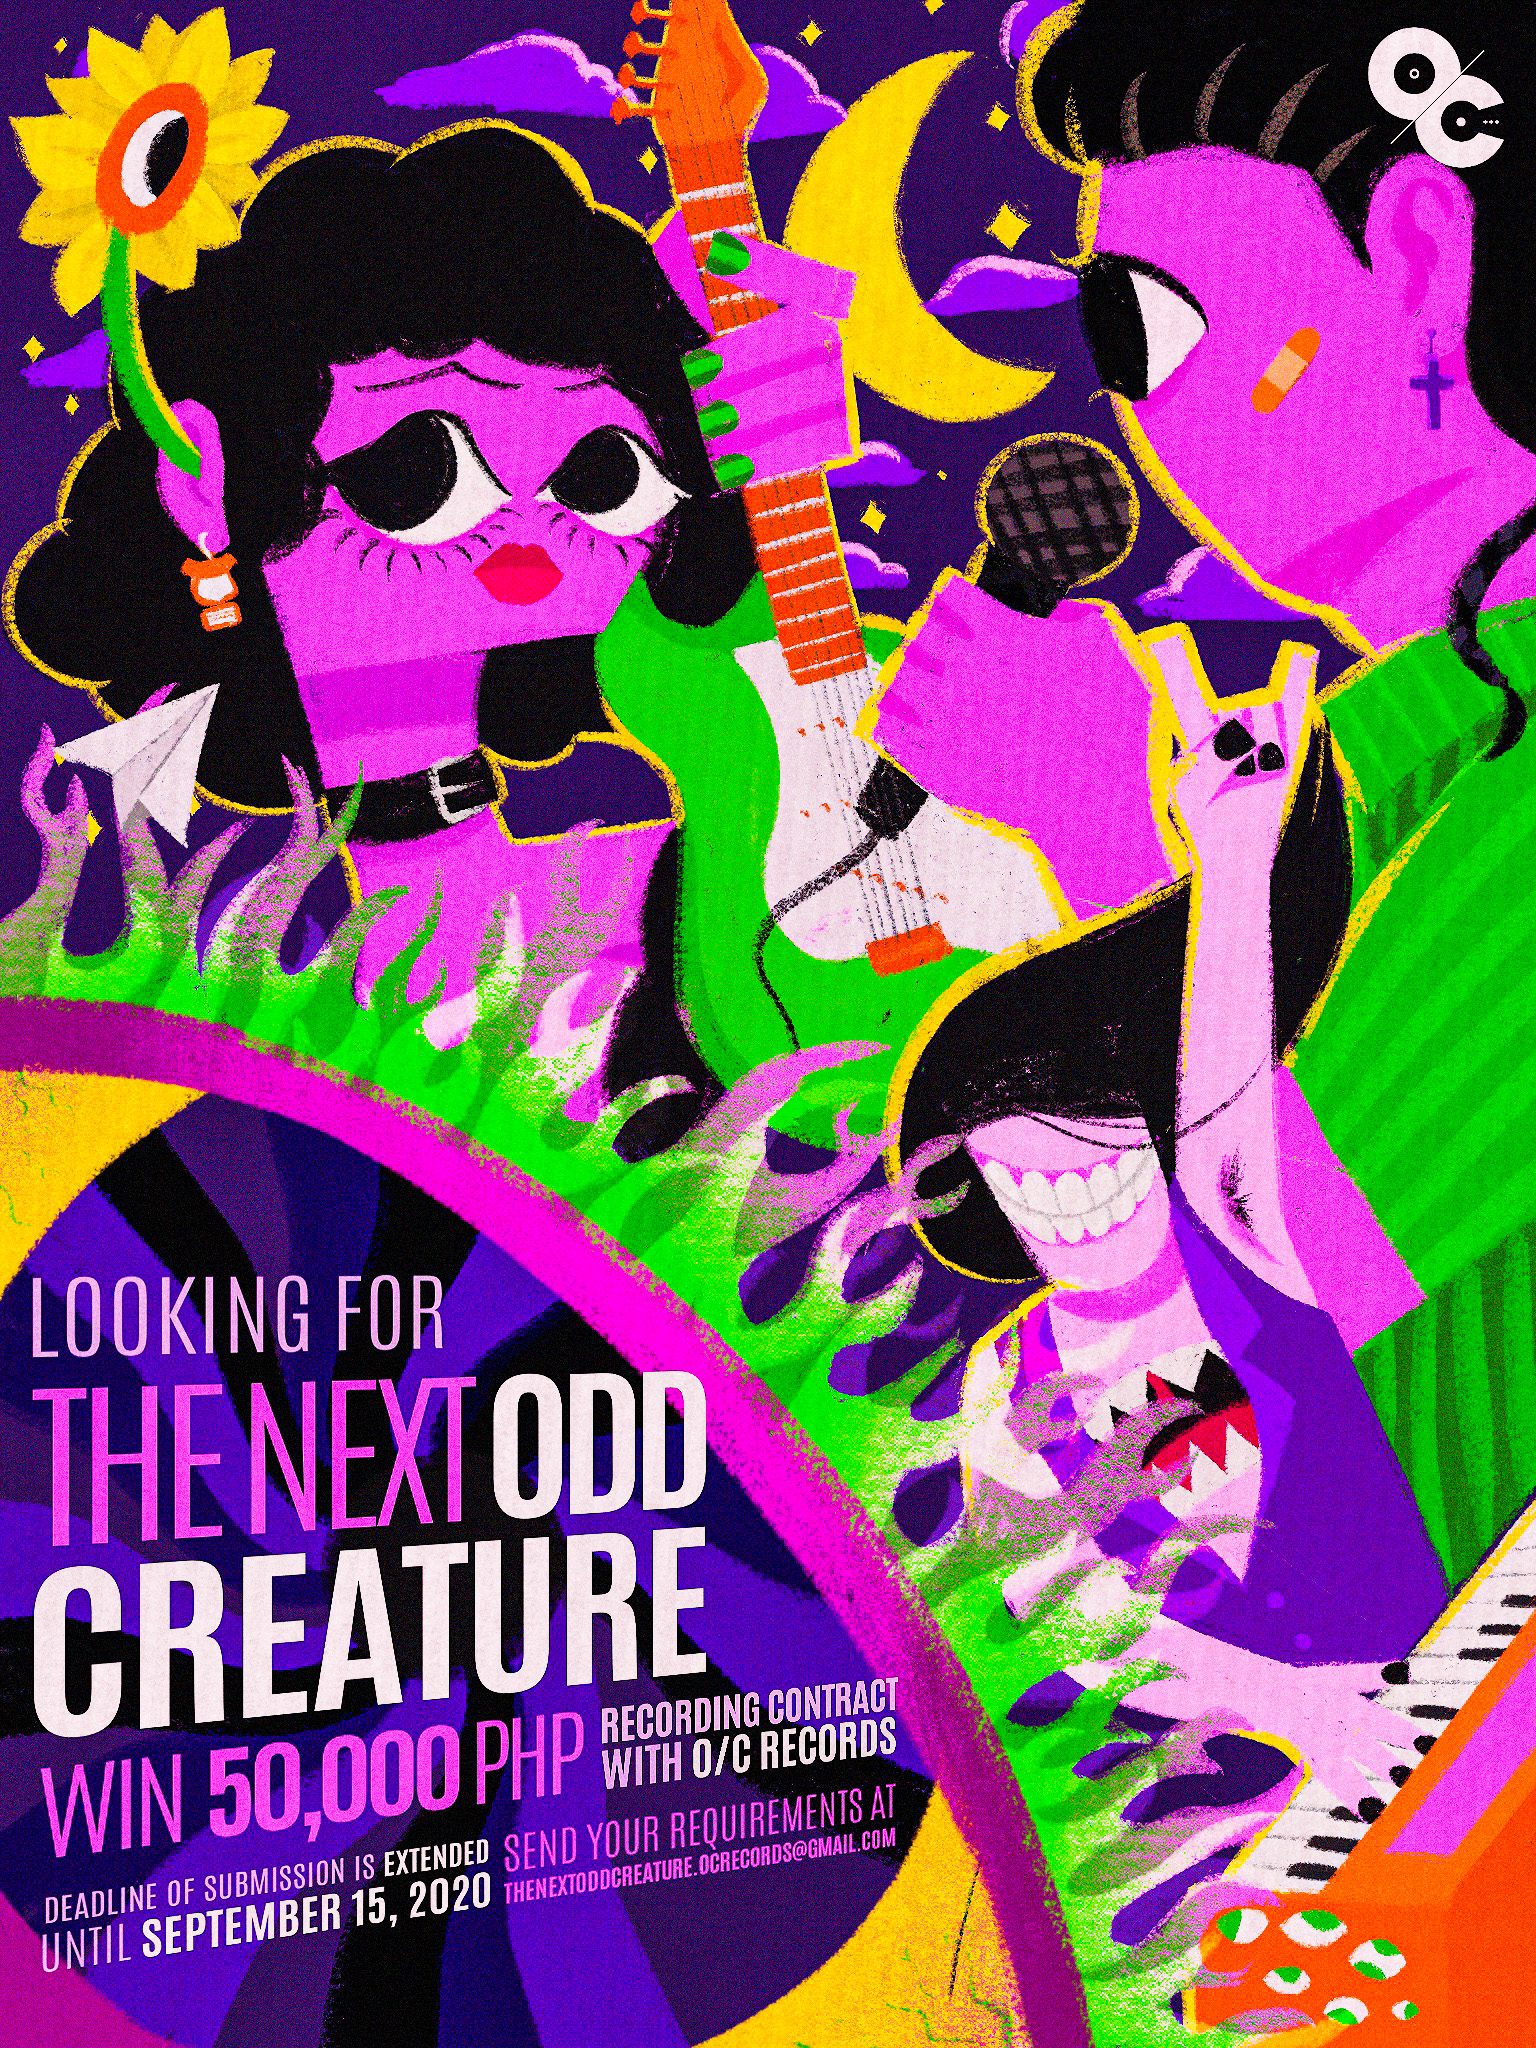 O/C Records is looking to sign their next ‘Odd Creature’